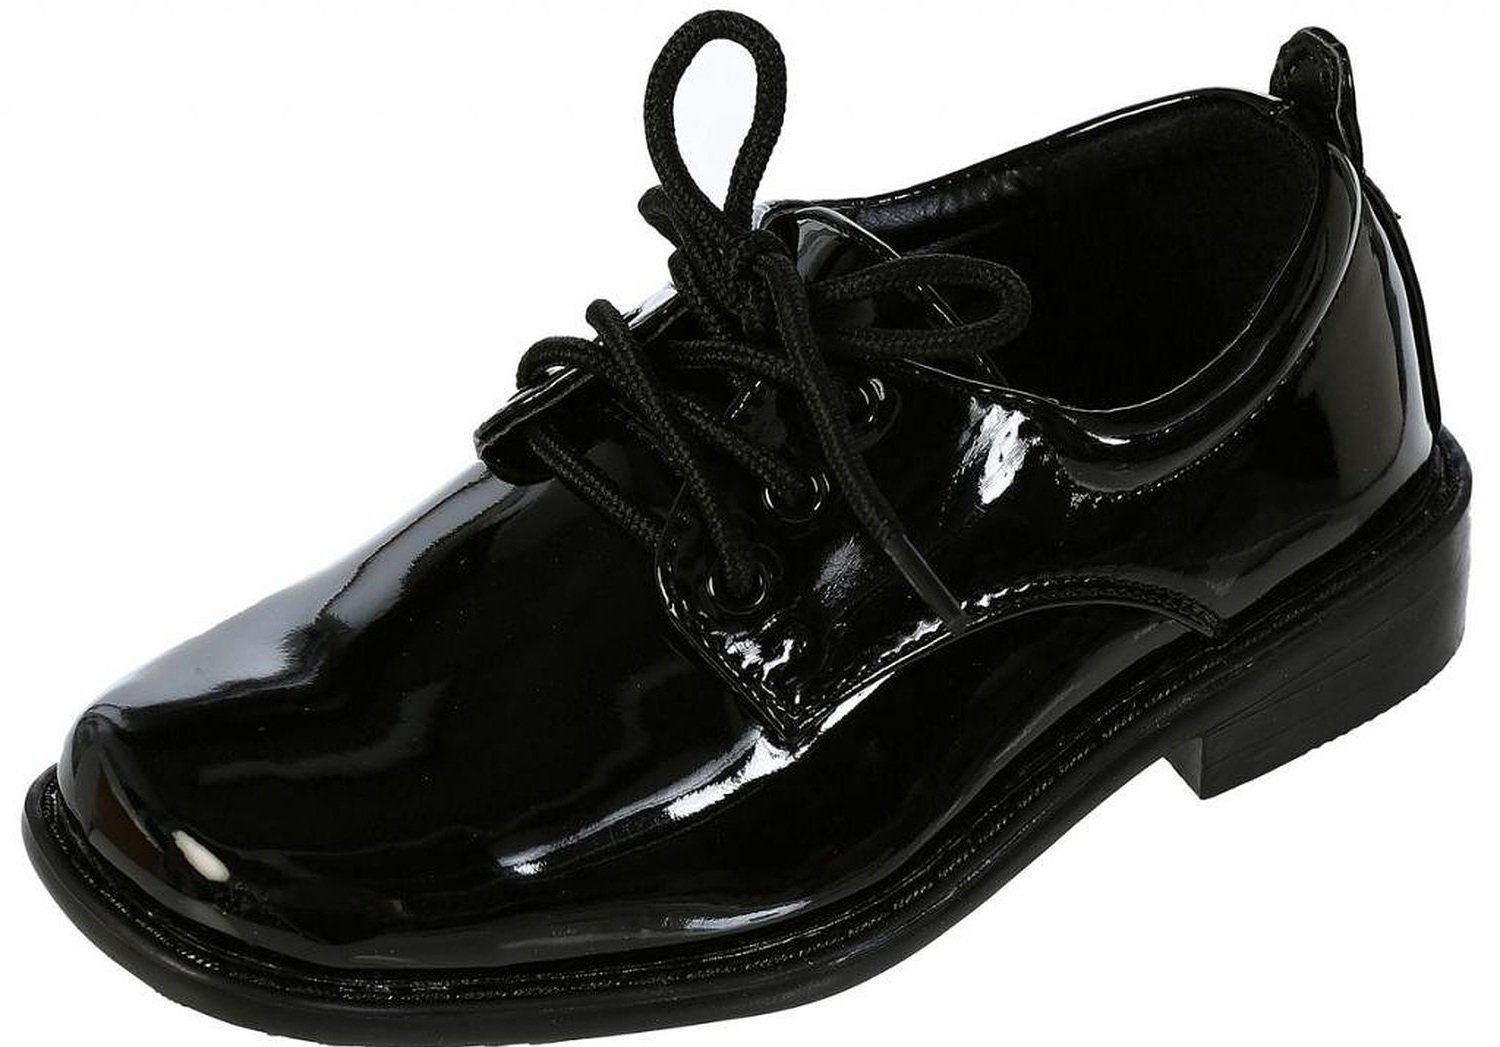 Boys Square Toe Lace Up Oxford Patent Dress Shoes - Available in Black 4 Big Kid